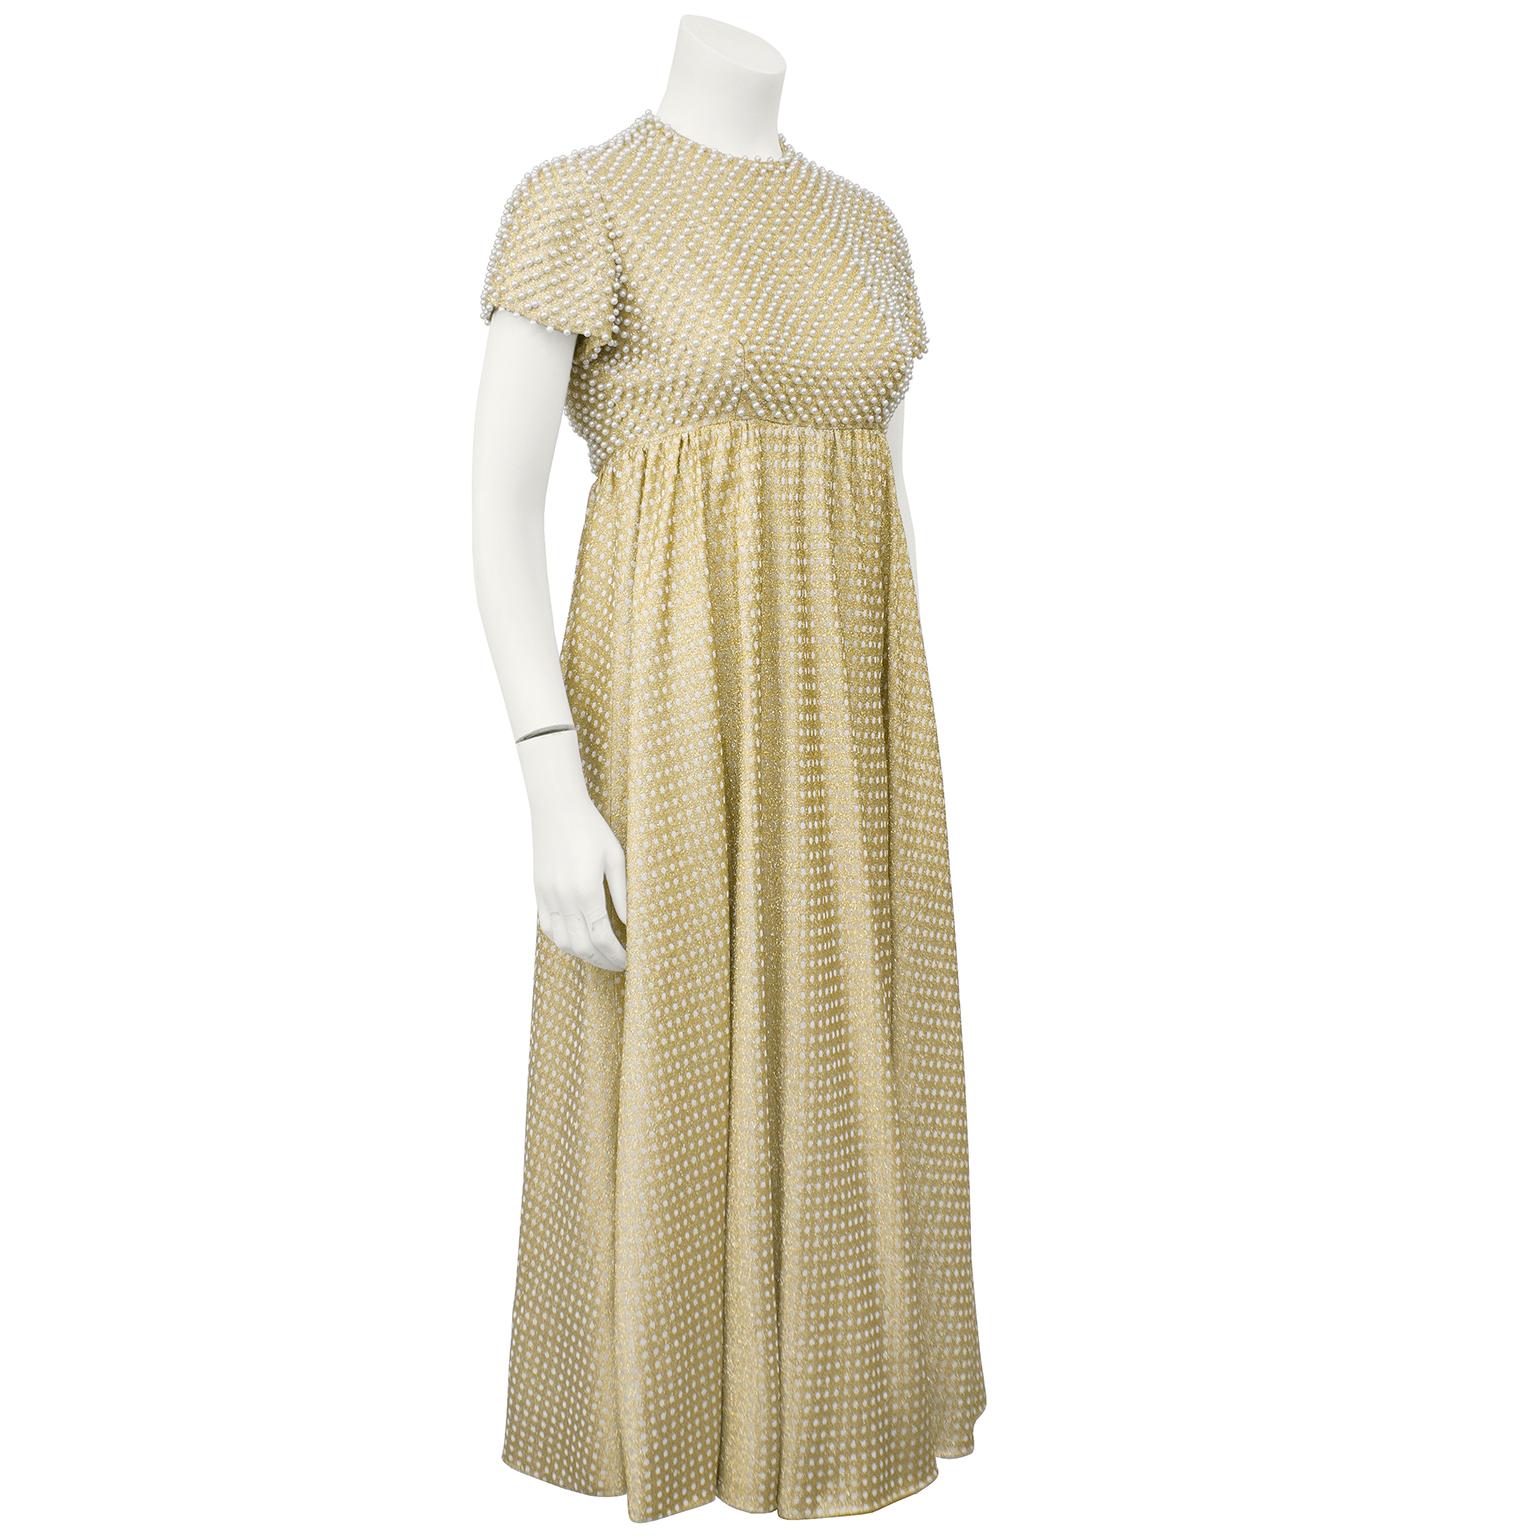 Stunning 1970's gold and white metallic knit maxi dress studded with pearls on the bodice. Capped sleeve, empire waist and flaired skirt combine well to highlight almost any figure. Currently ankle length. In fresh clean and ready to wear condition.